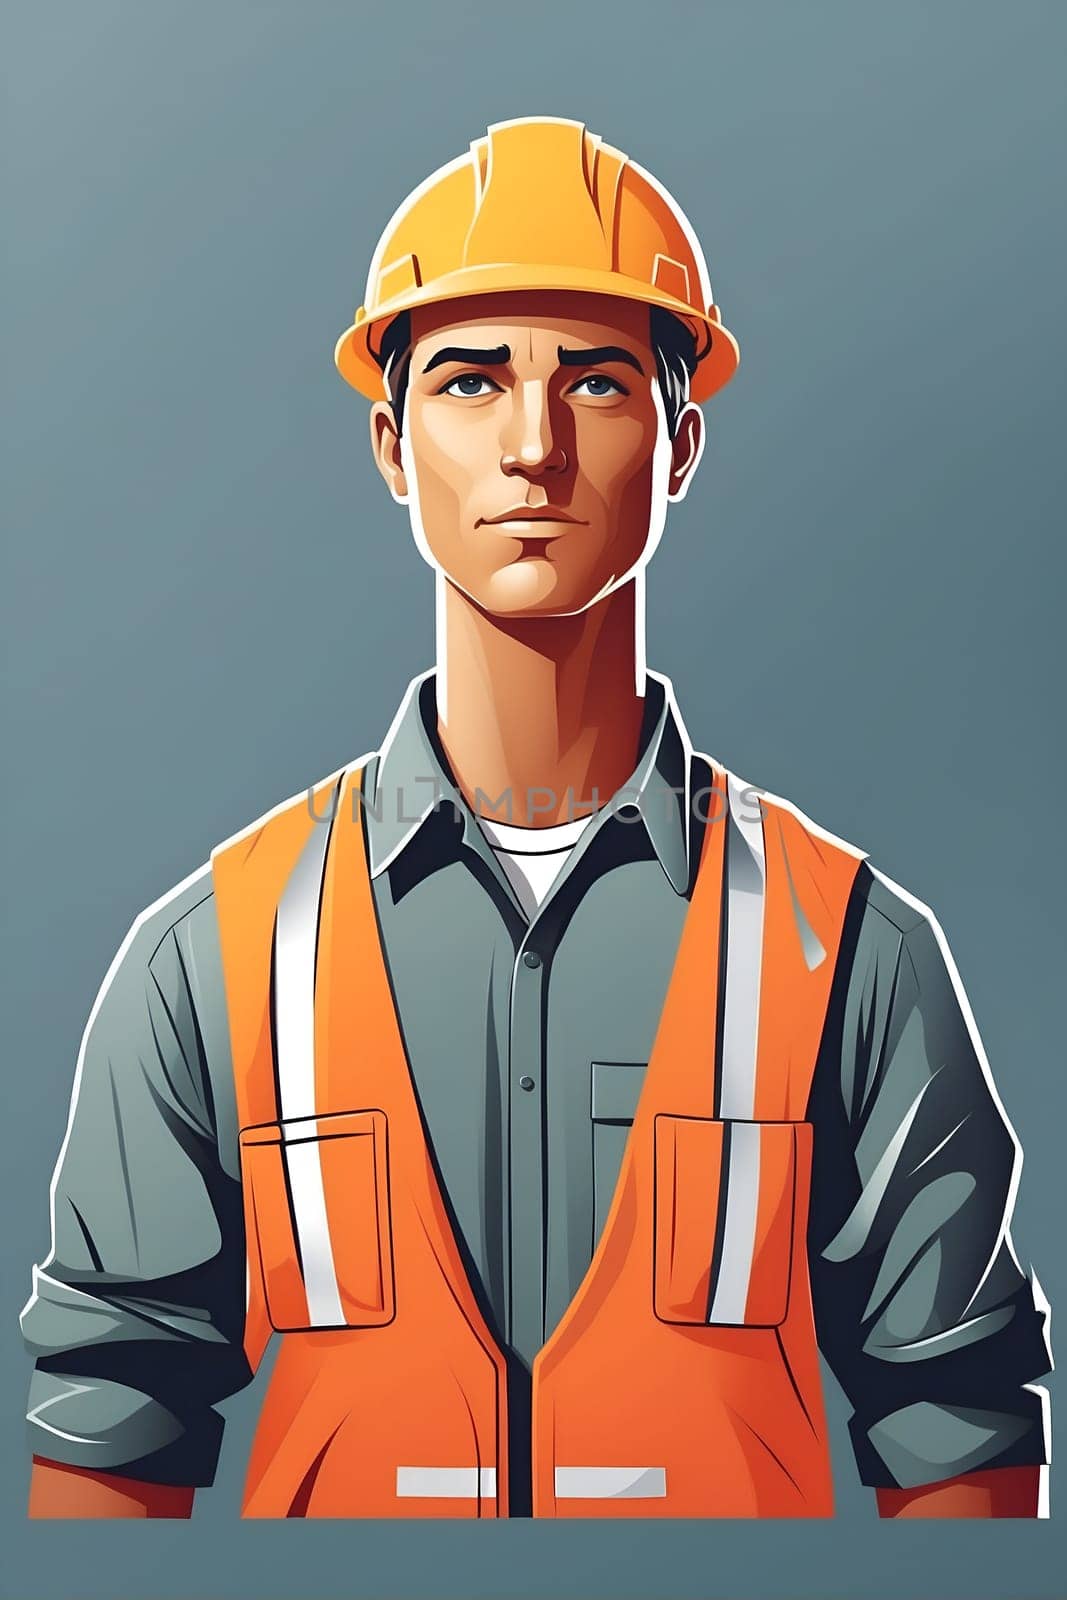 A man is seen wearing a hard hat and an orange safety vest at a construction site.